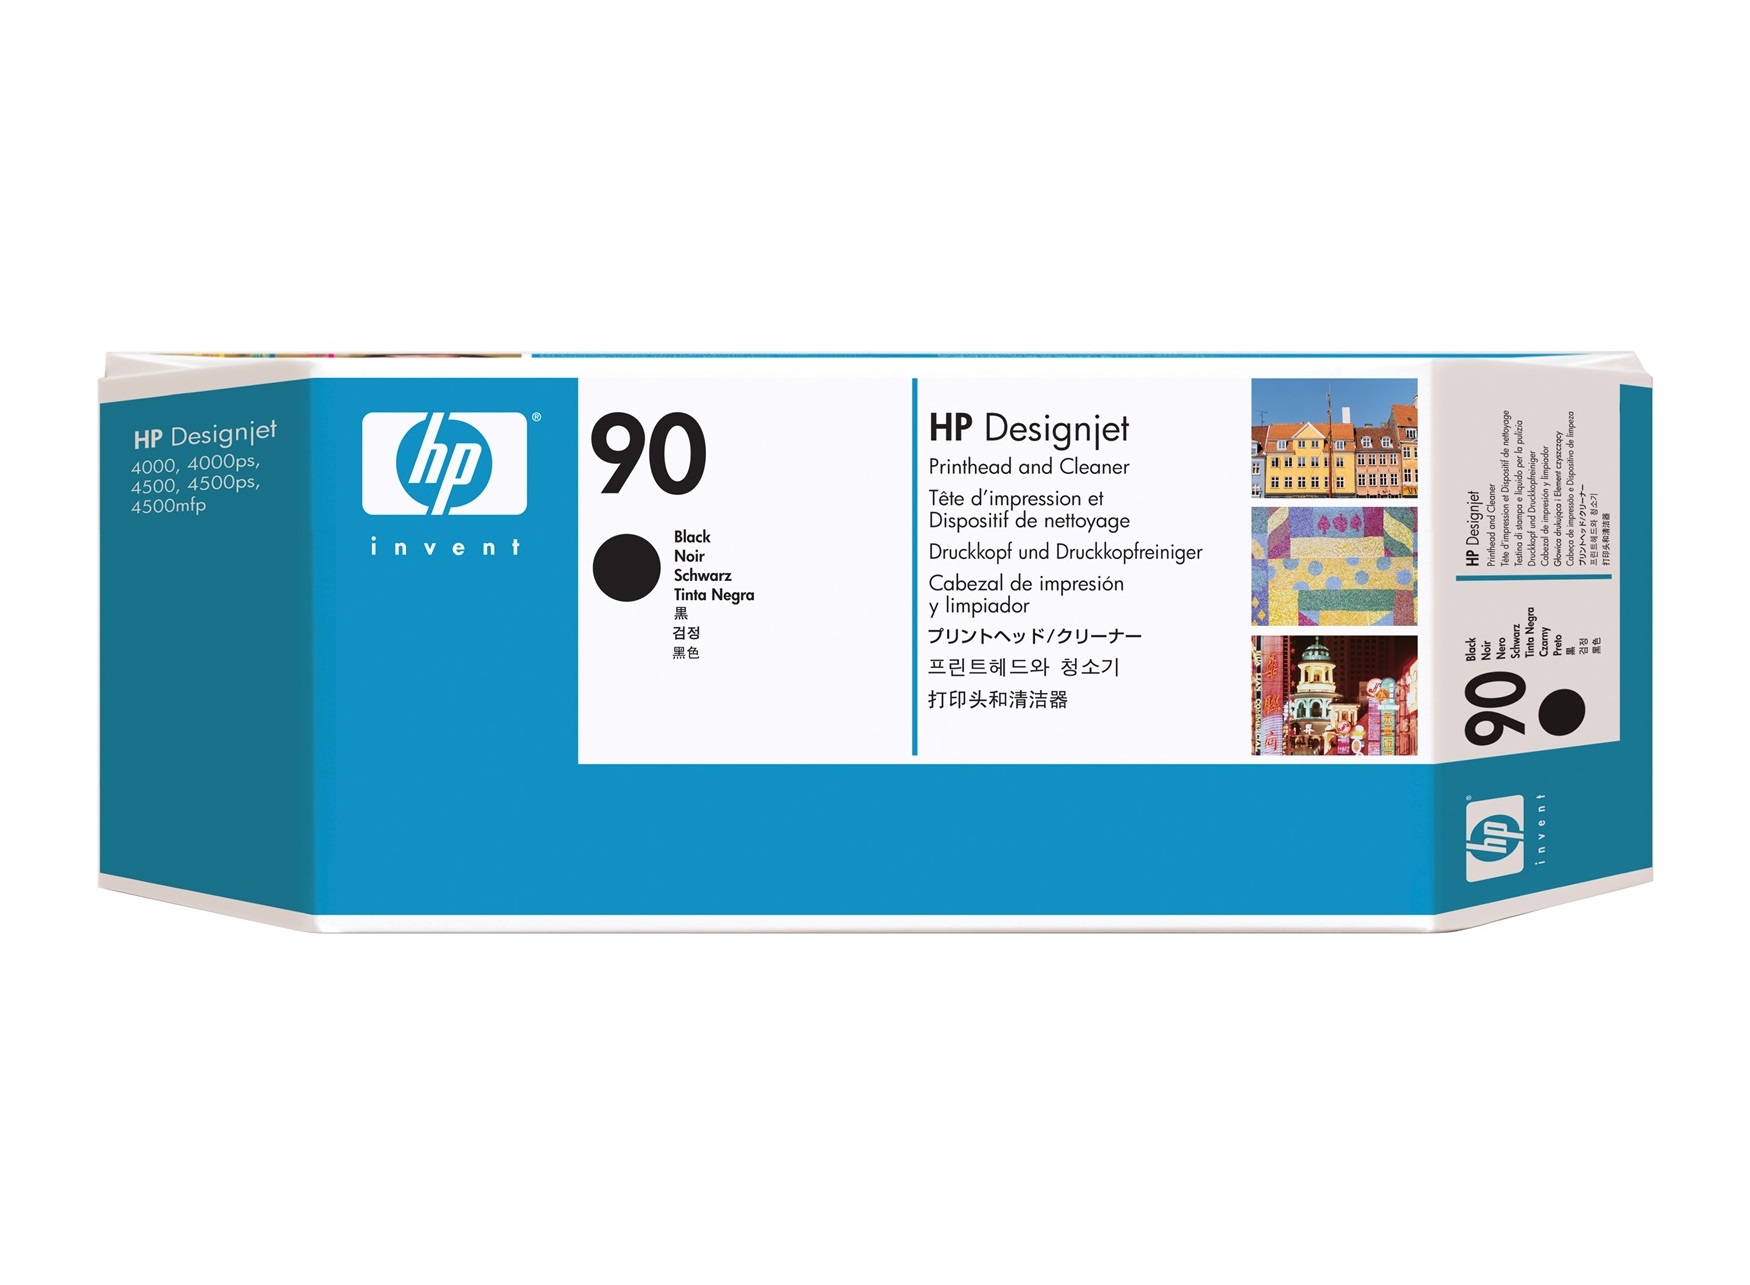 Related to 4000 INKJET CARTRIDGES: C5054A